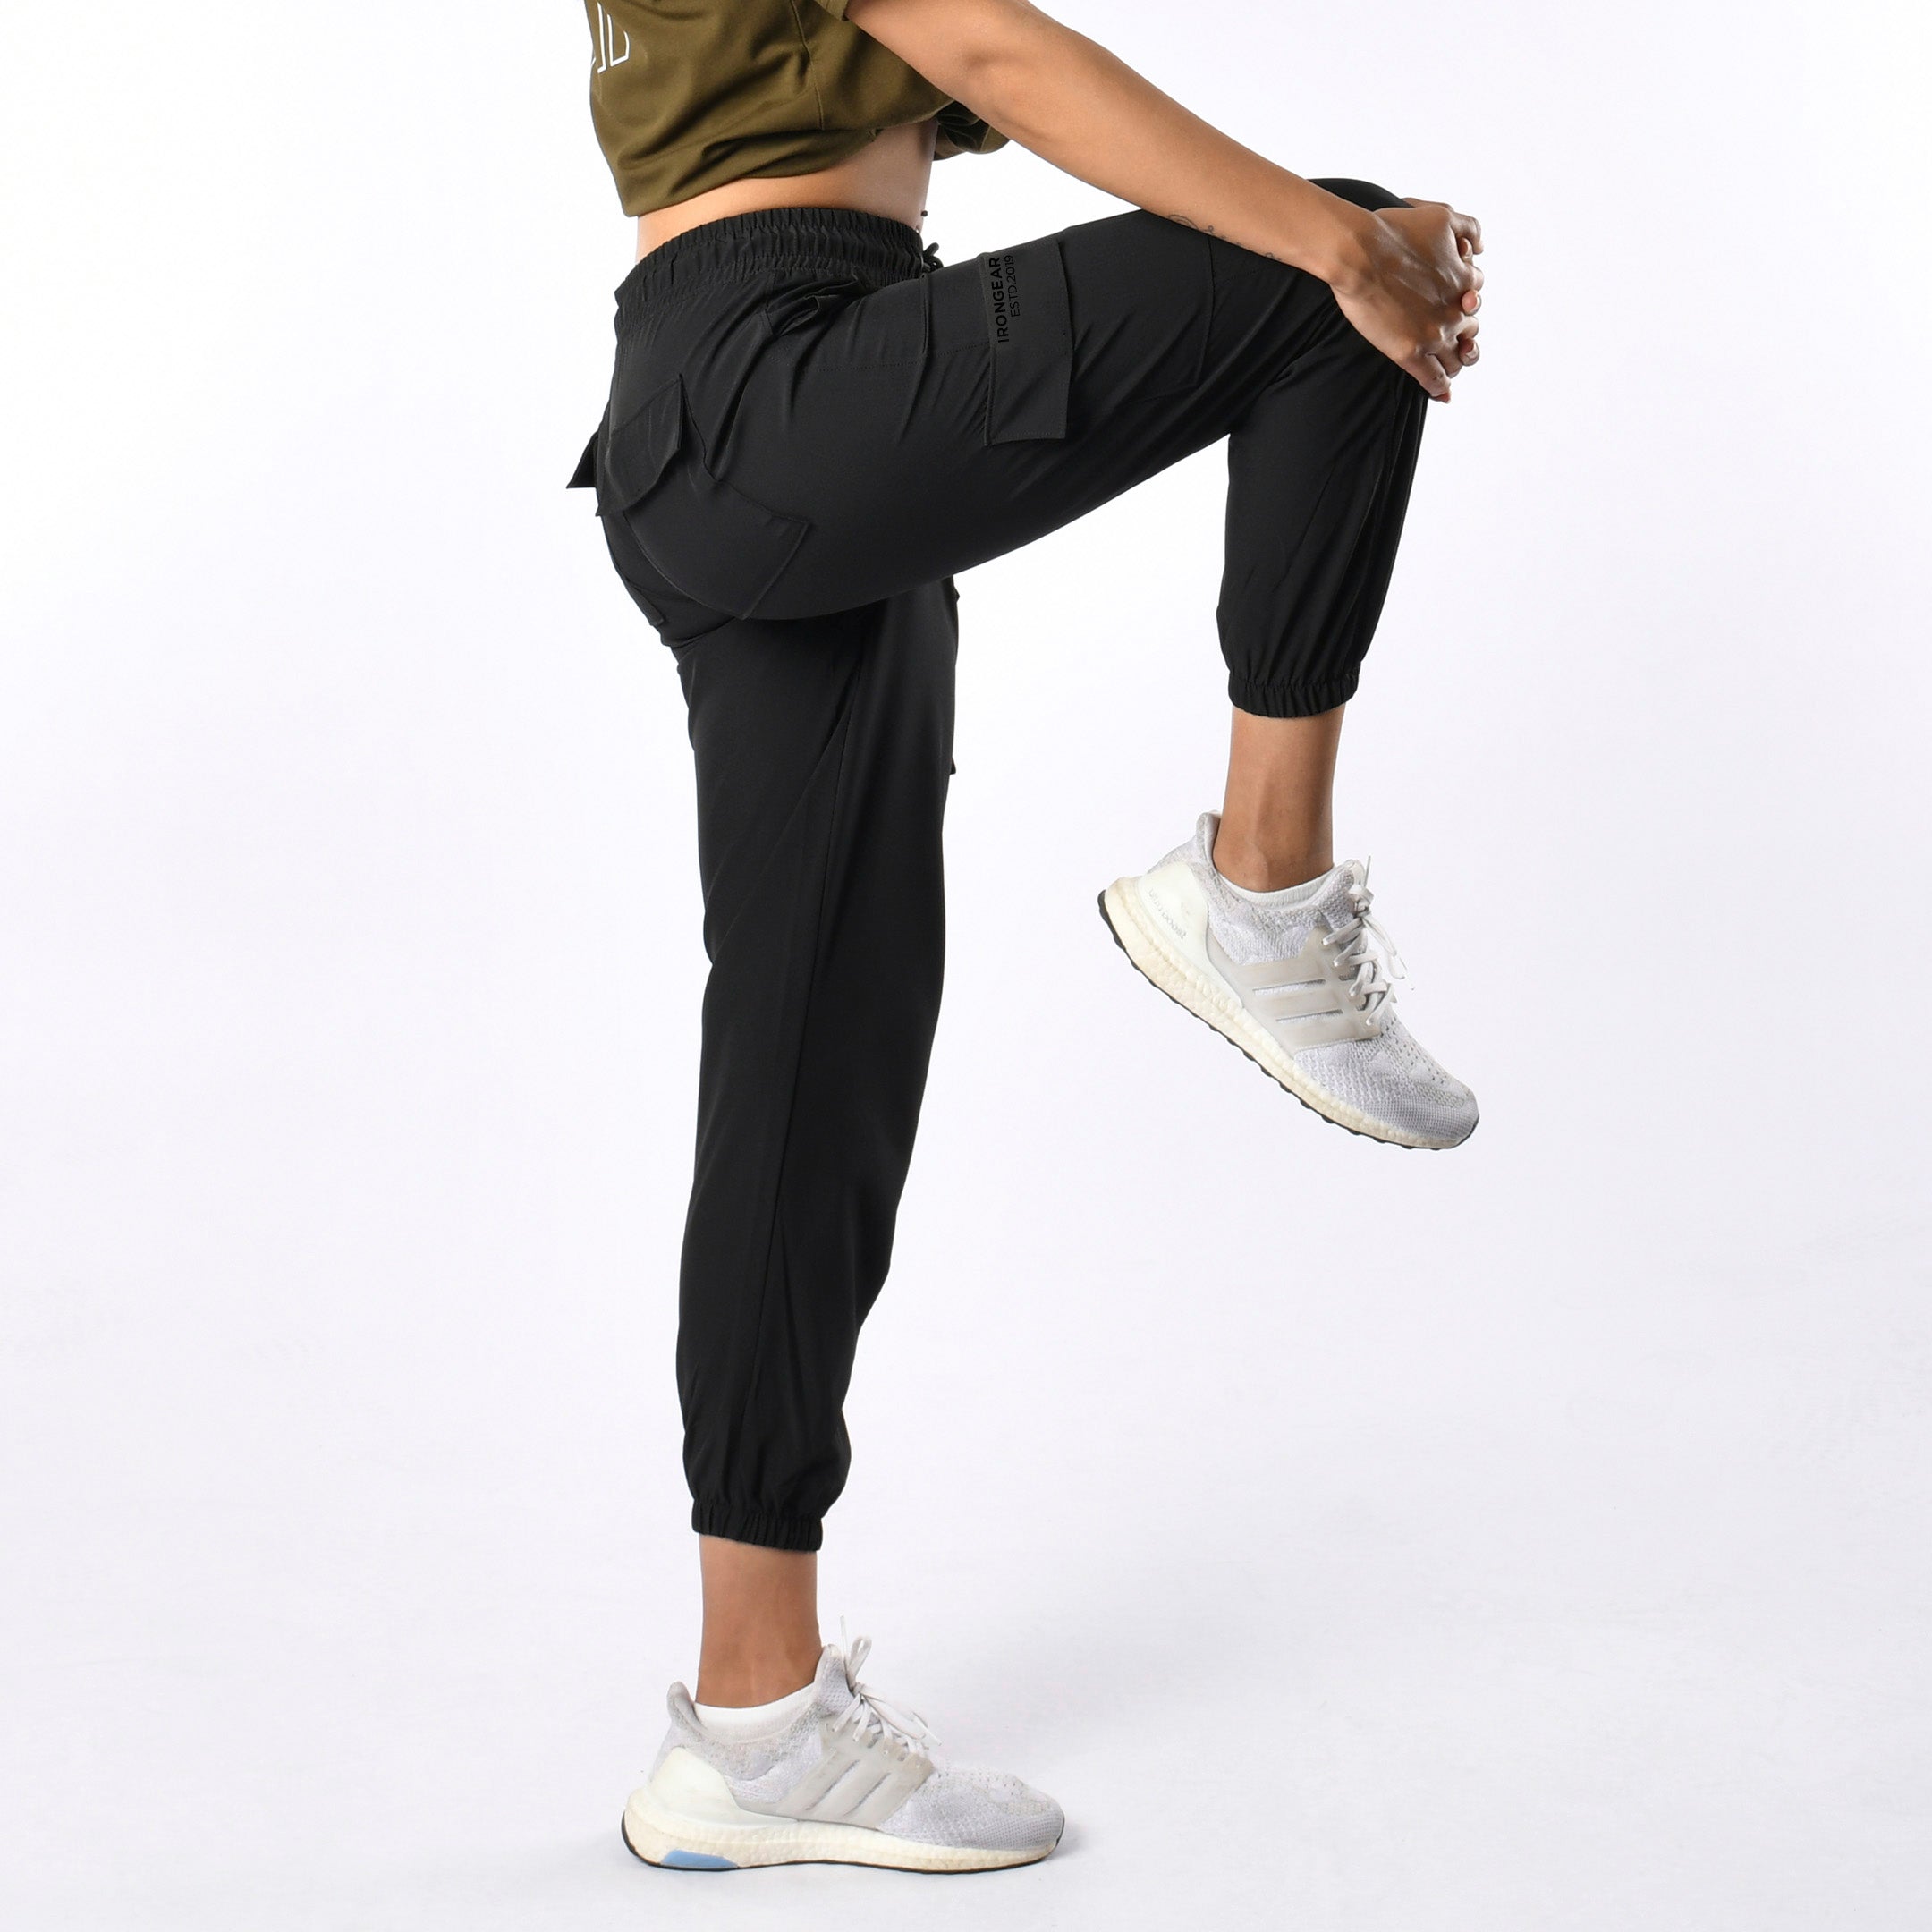 Leisure Cargo Pants For Women